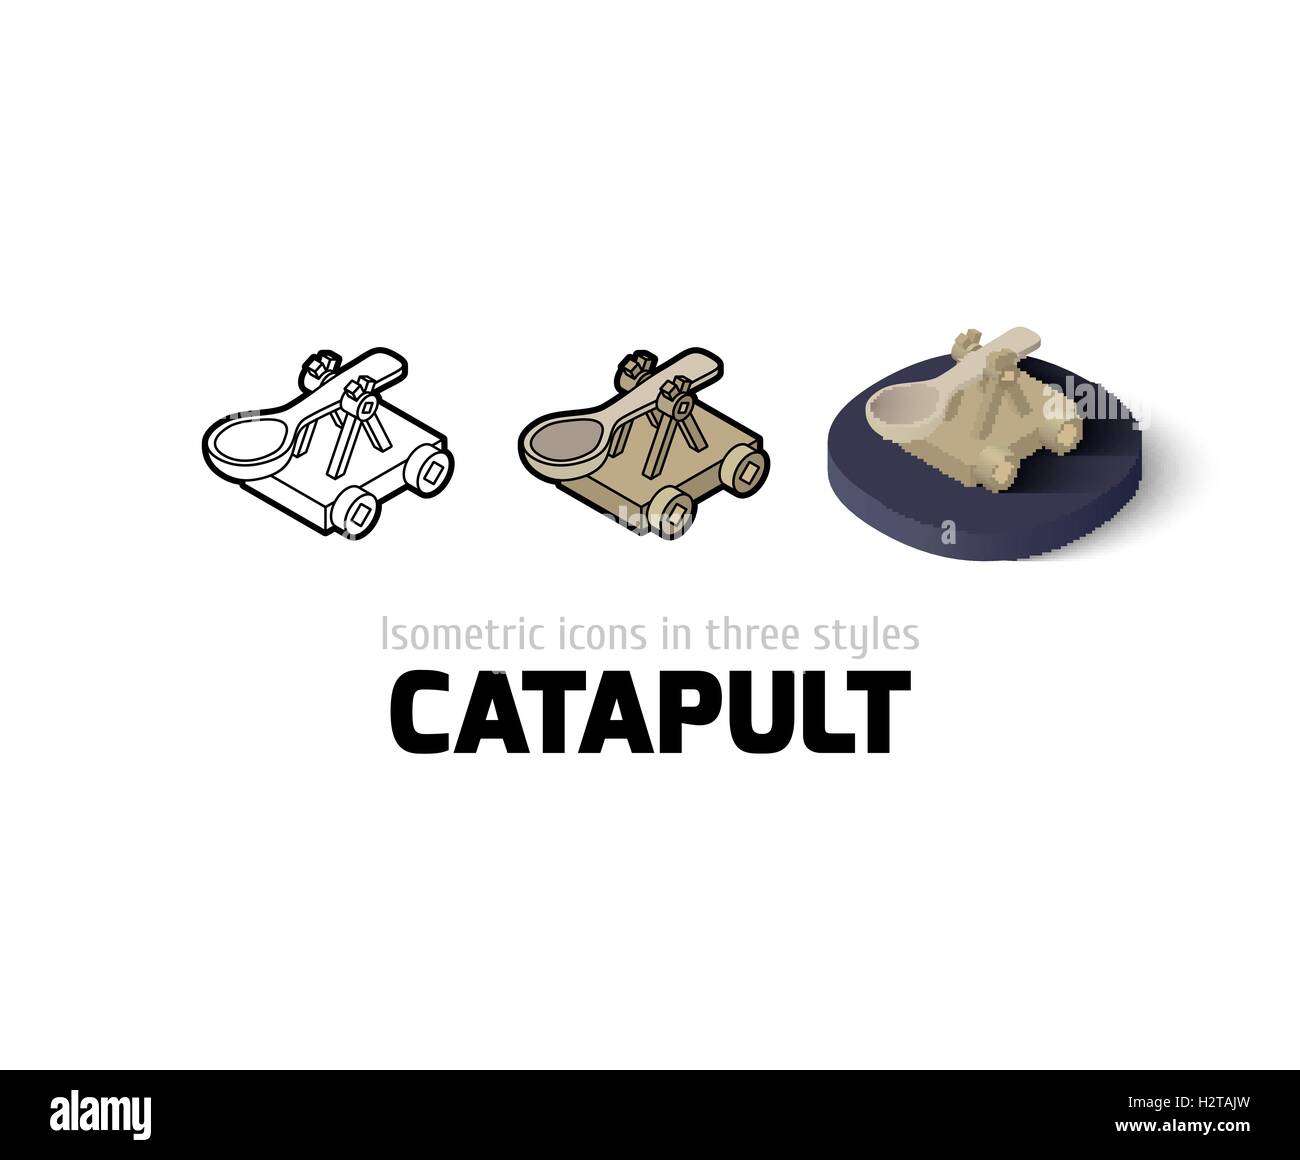 Catapult icon in different style Stock Vector